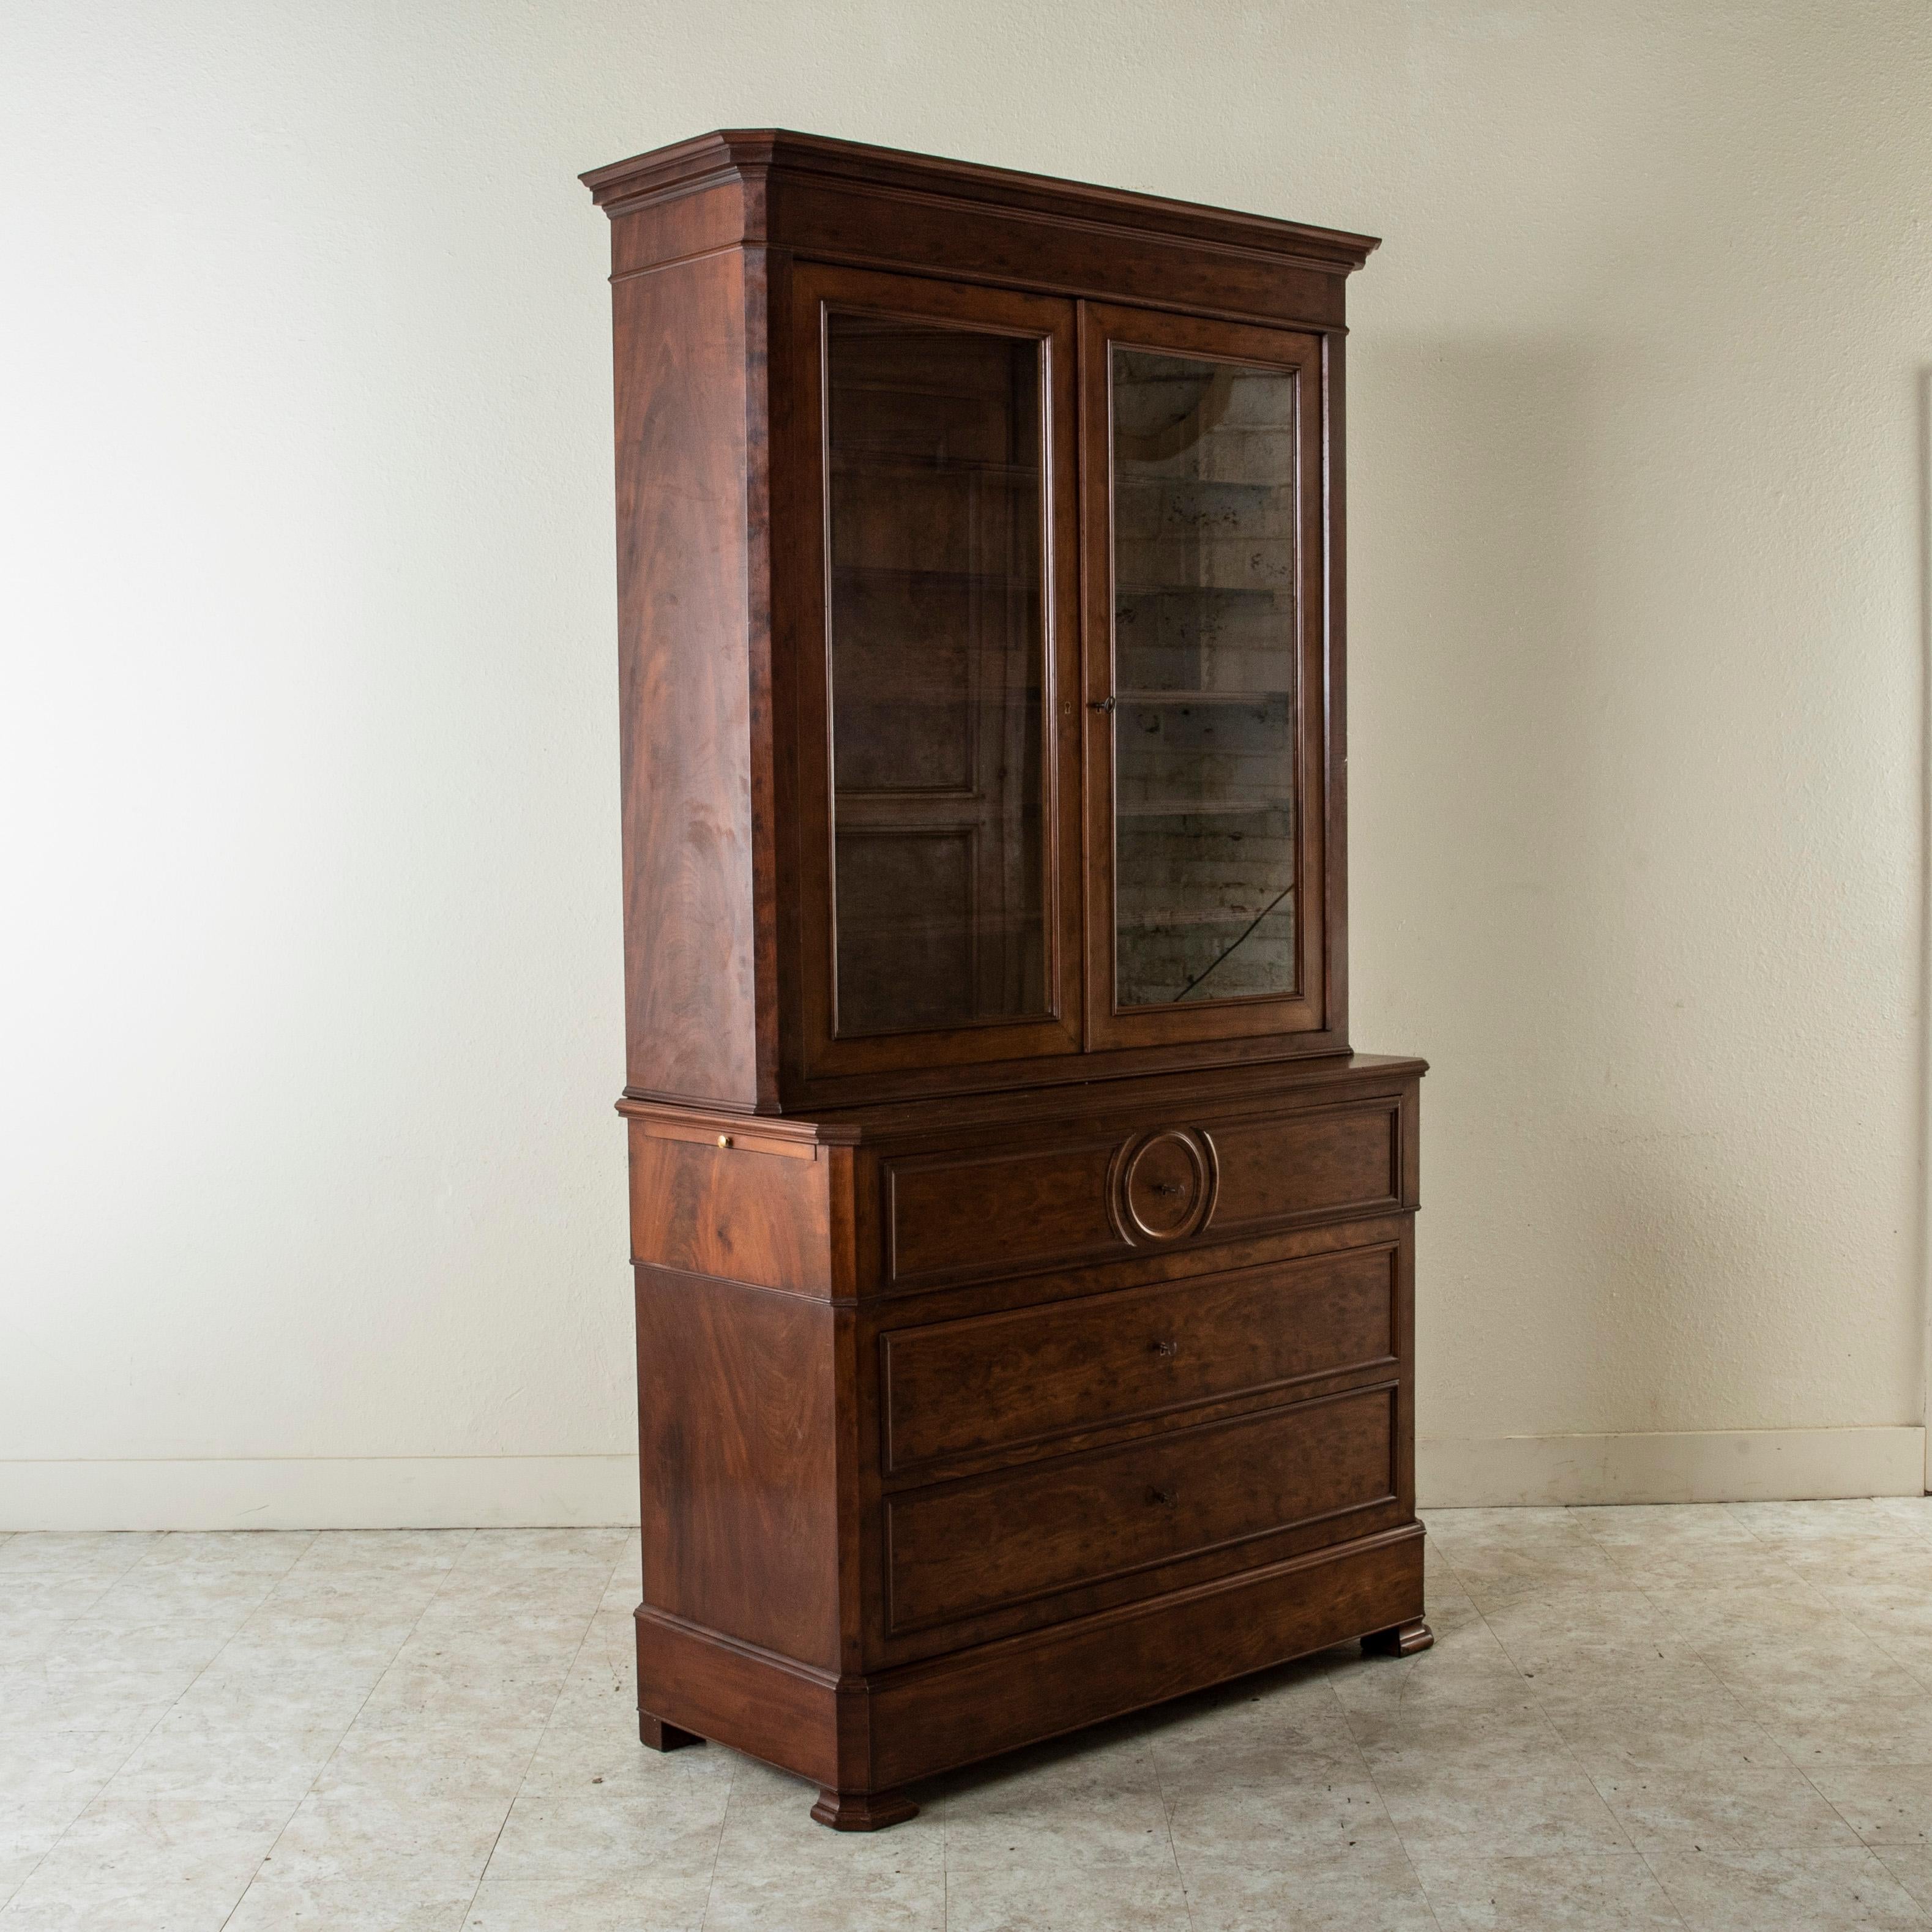 This nineteenth century French Napoleon III period buffet deux corps or bookcase is constructed of mahogany and features clean simple lines. Its upper cabinet is fitted with glass doors and contains five adjustable interior shelves. The lower